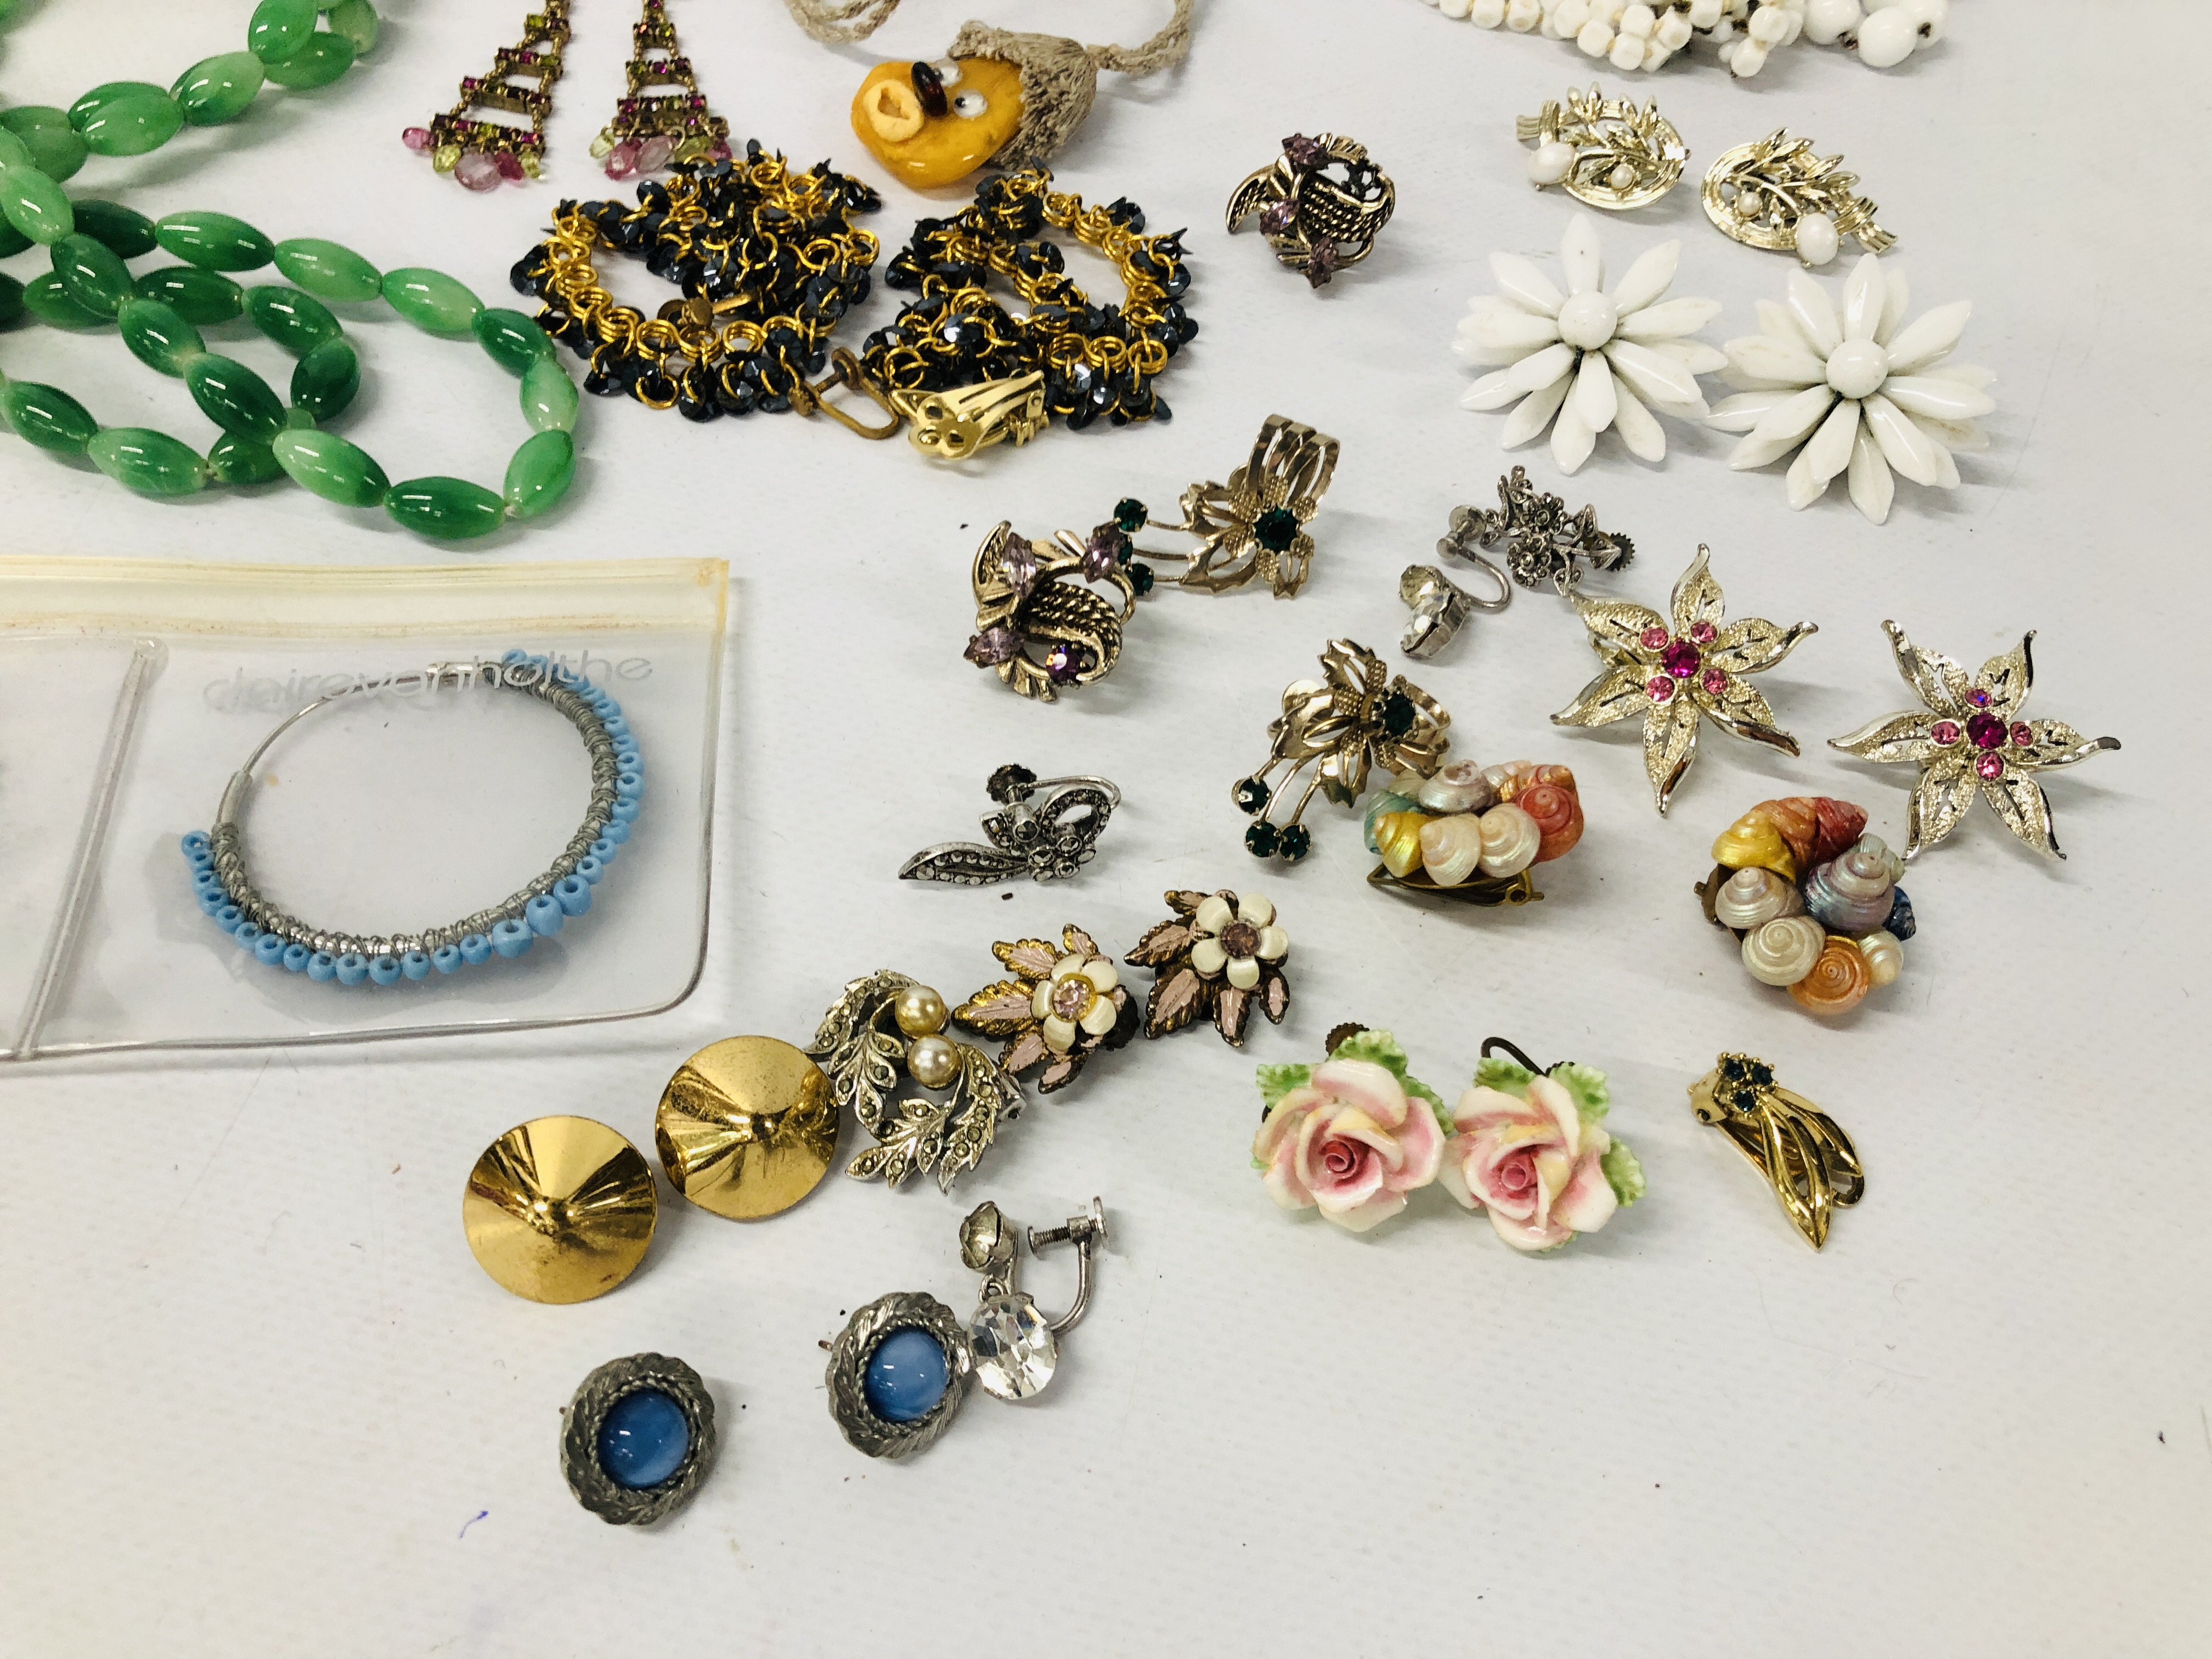 TWO BOXES OF ASSORTED COSTUME JEWELLERY INCLUDING BEADS AND PENDANTS, EARRINGS ETC. - Image 2 of 7